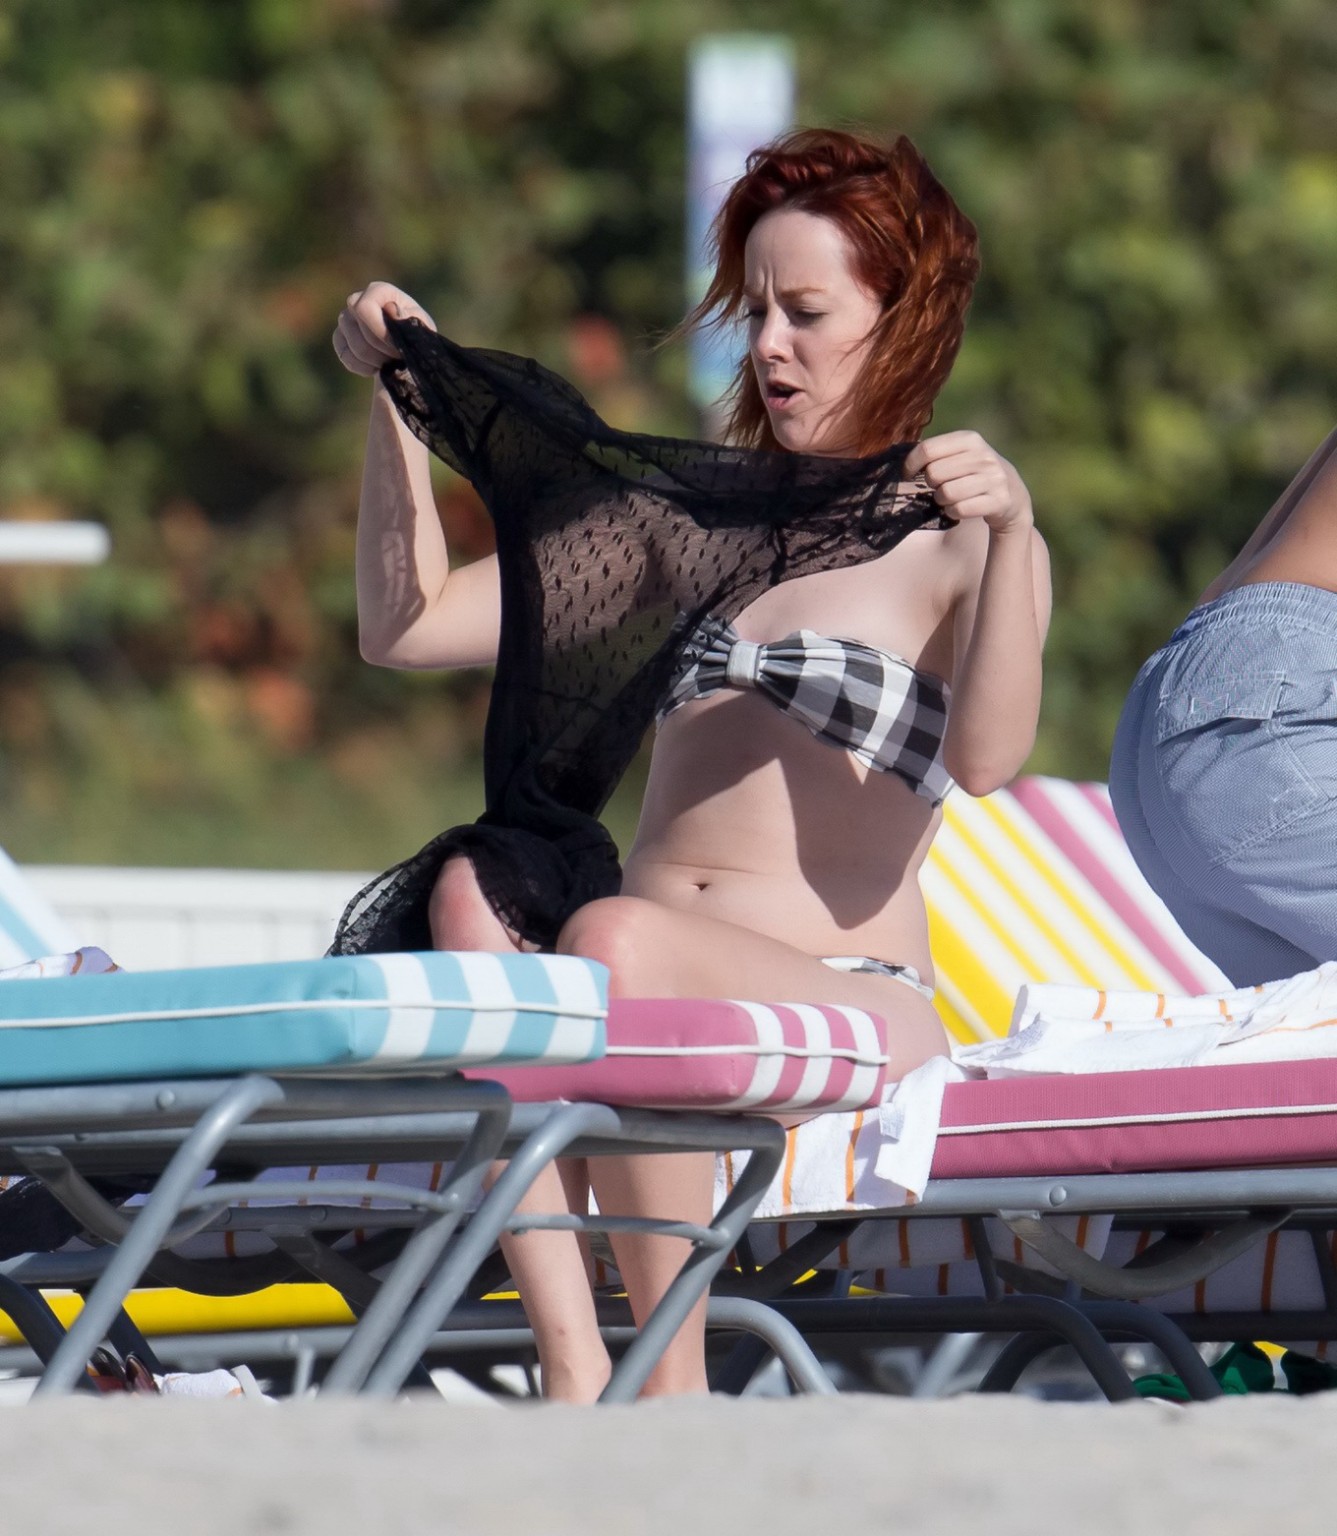 Jena Malone showing her juicy ass in strapless monochrome bikini at the beach in #75178953